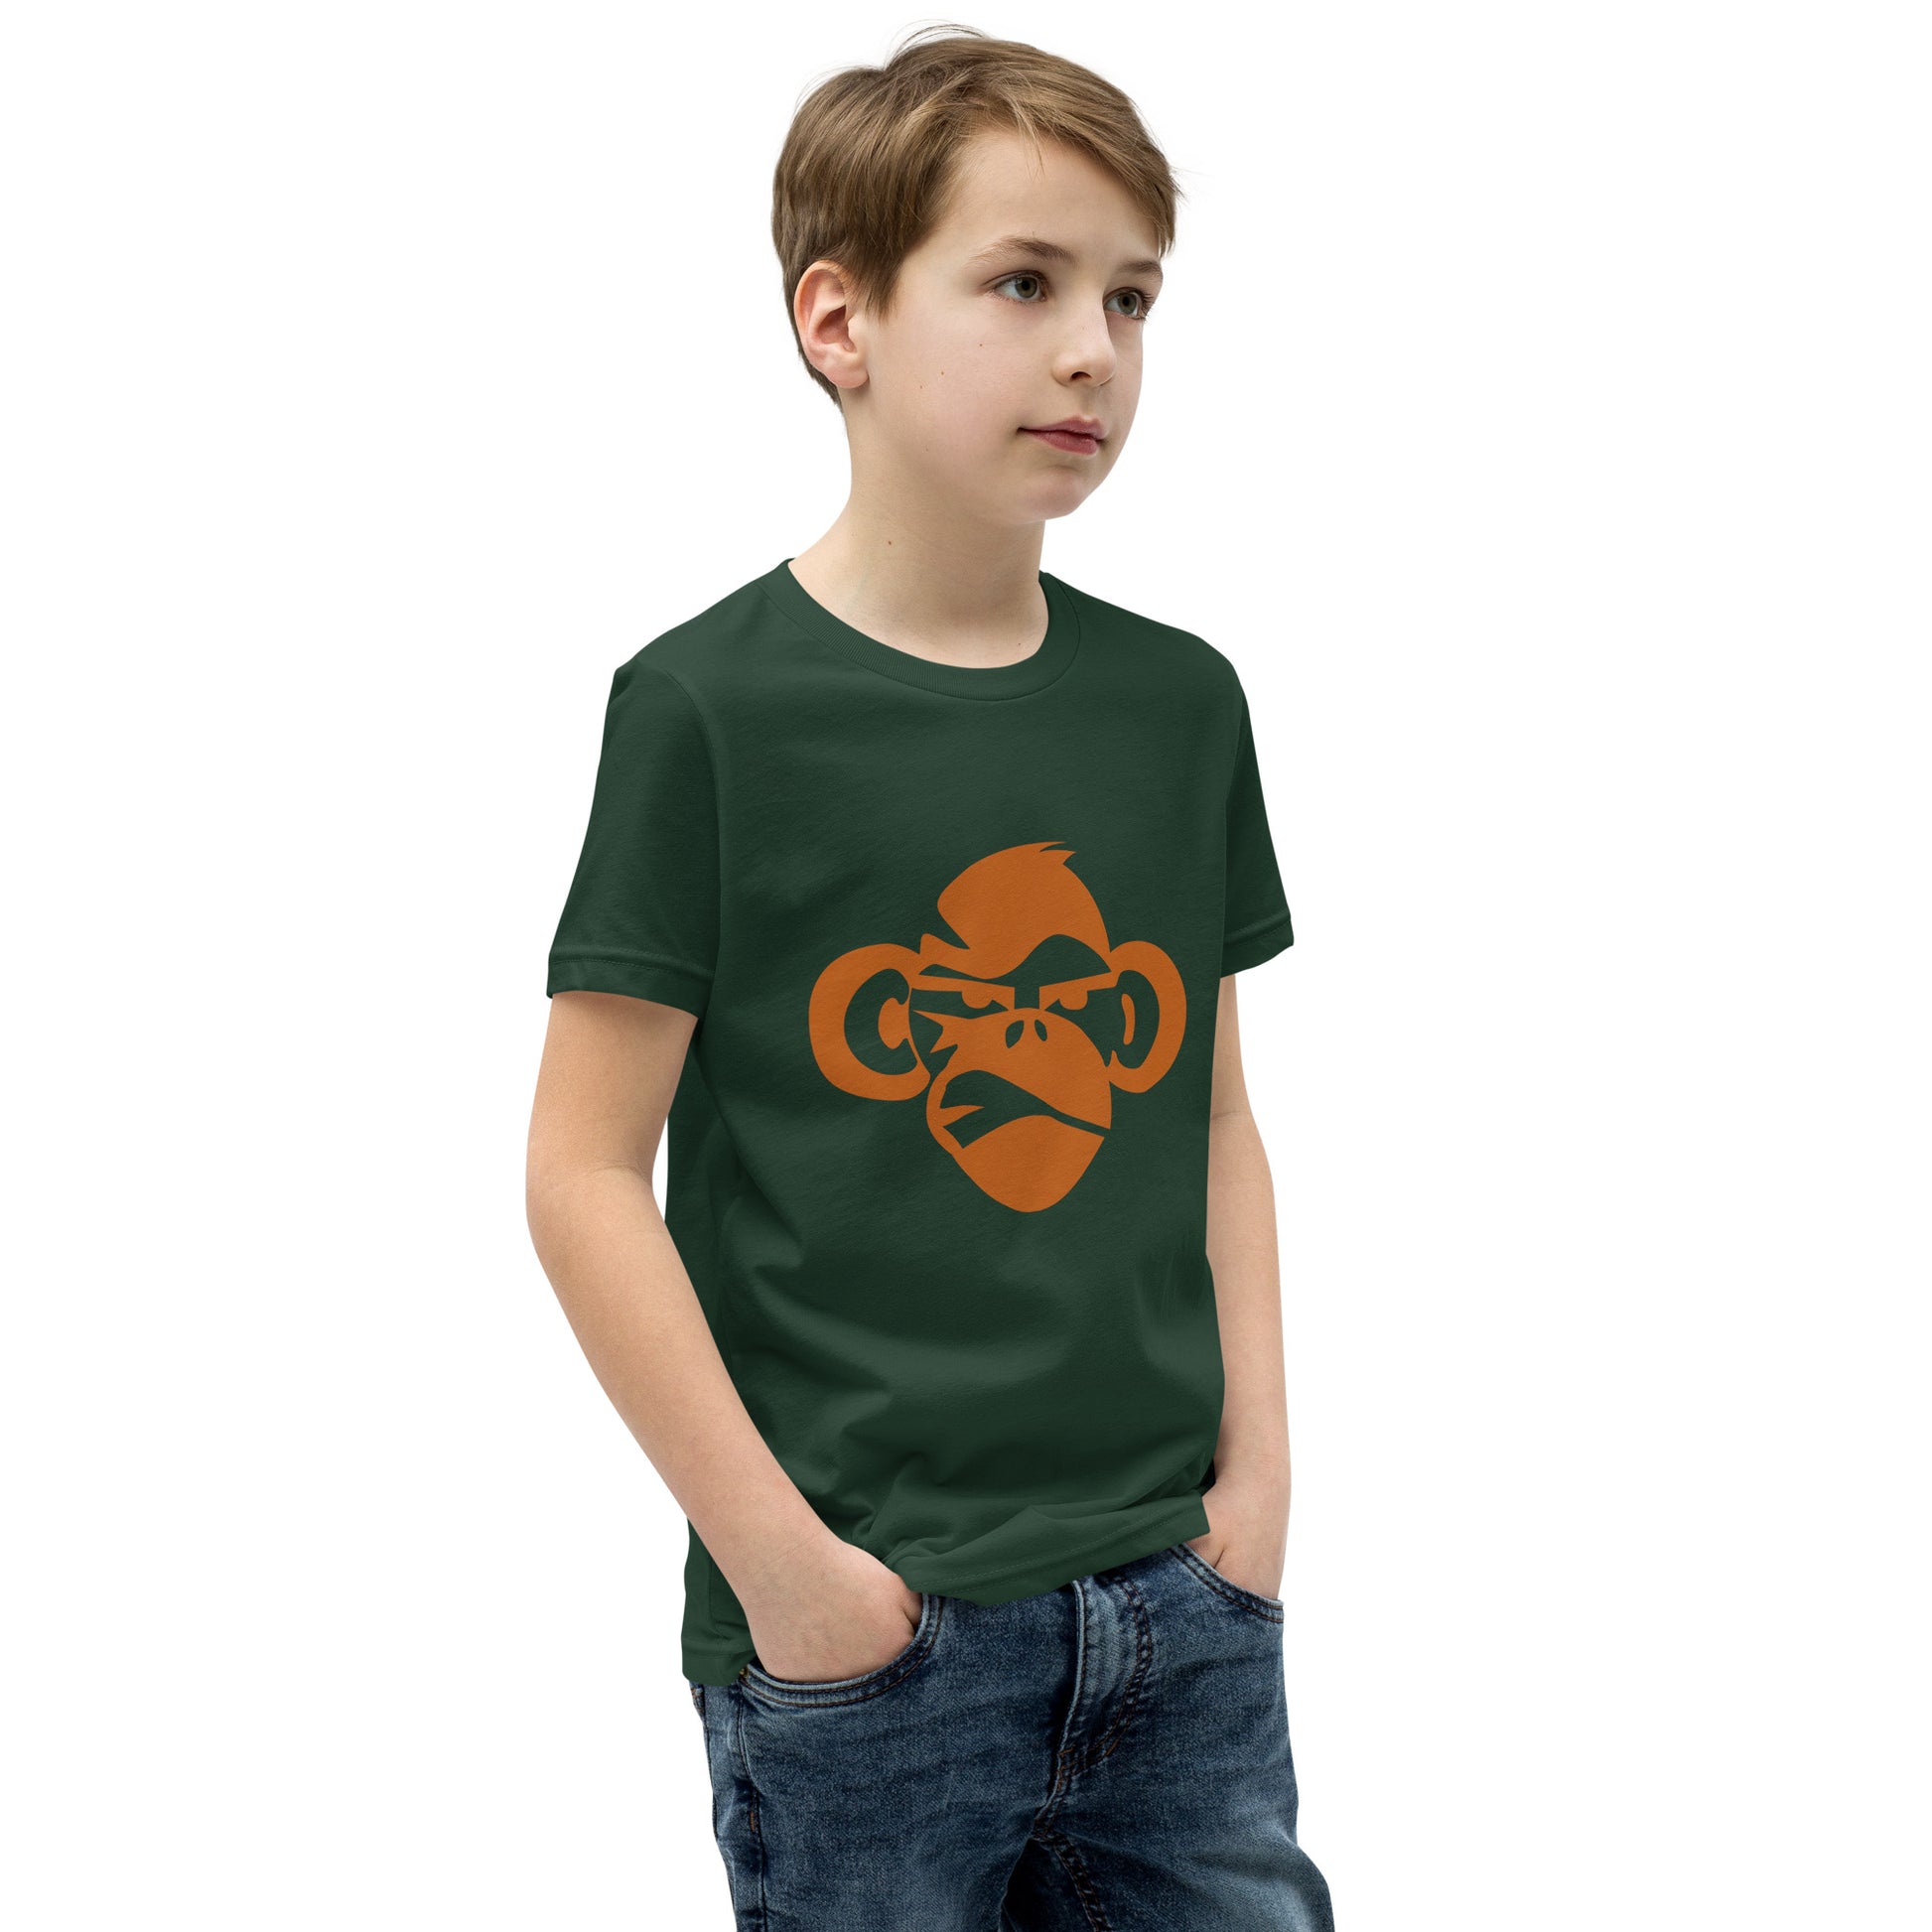 Youth with forest green T-shirt with a print of a head of a monkey in color brown